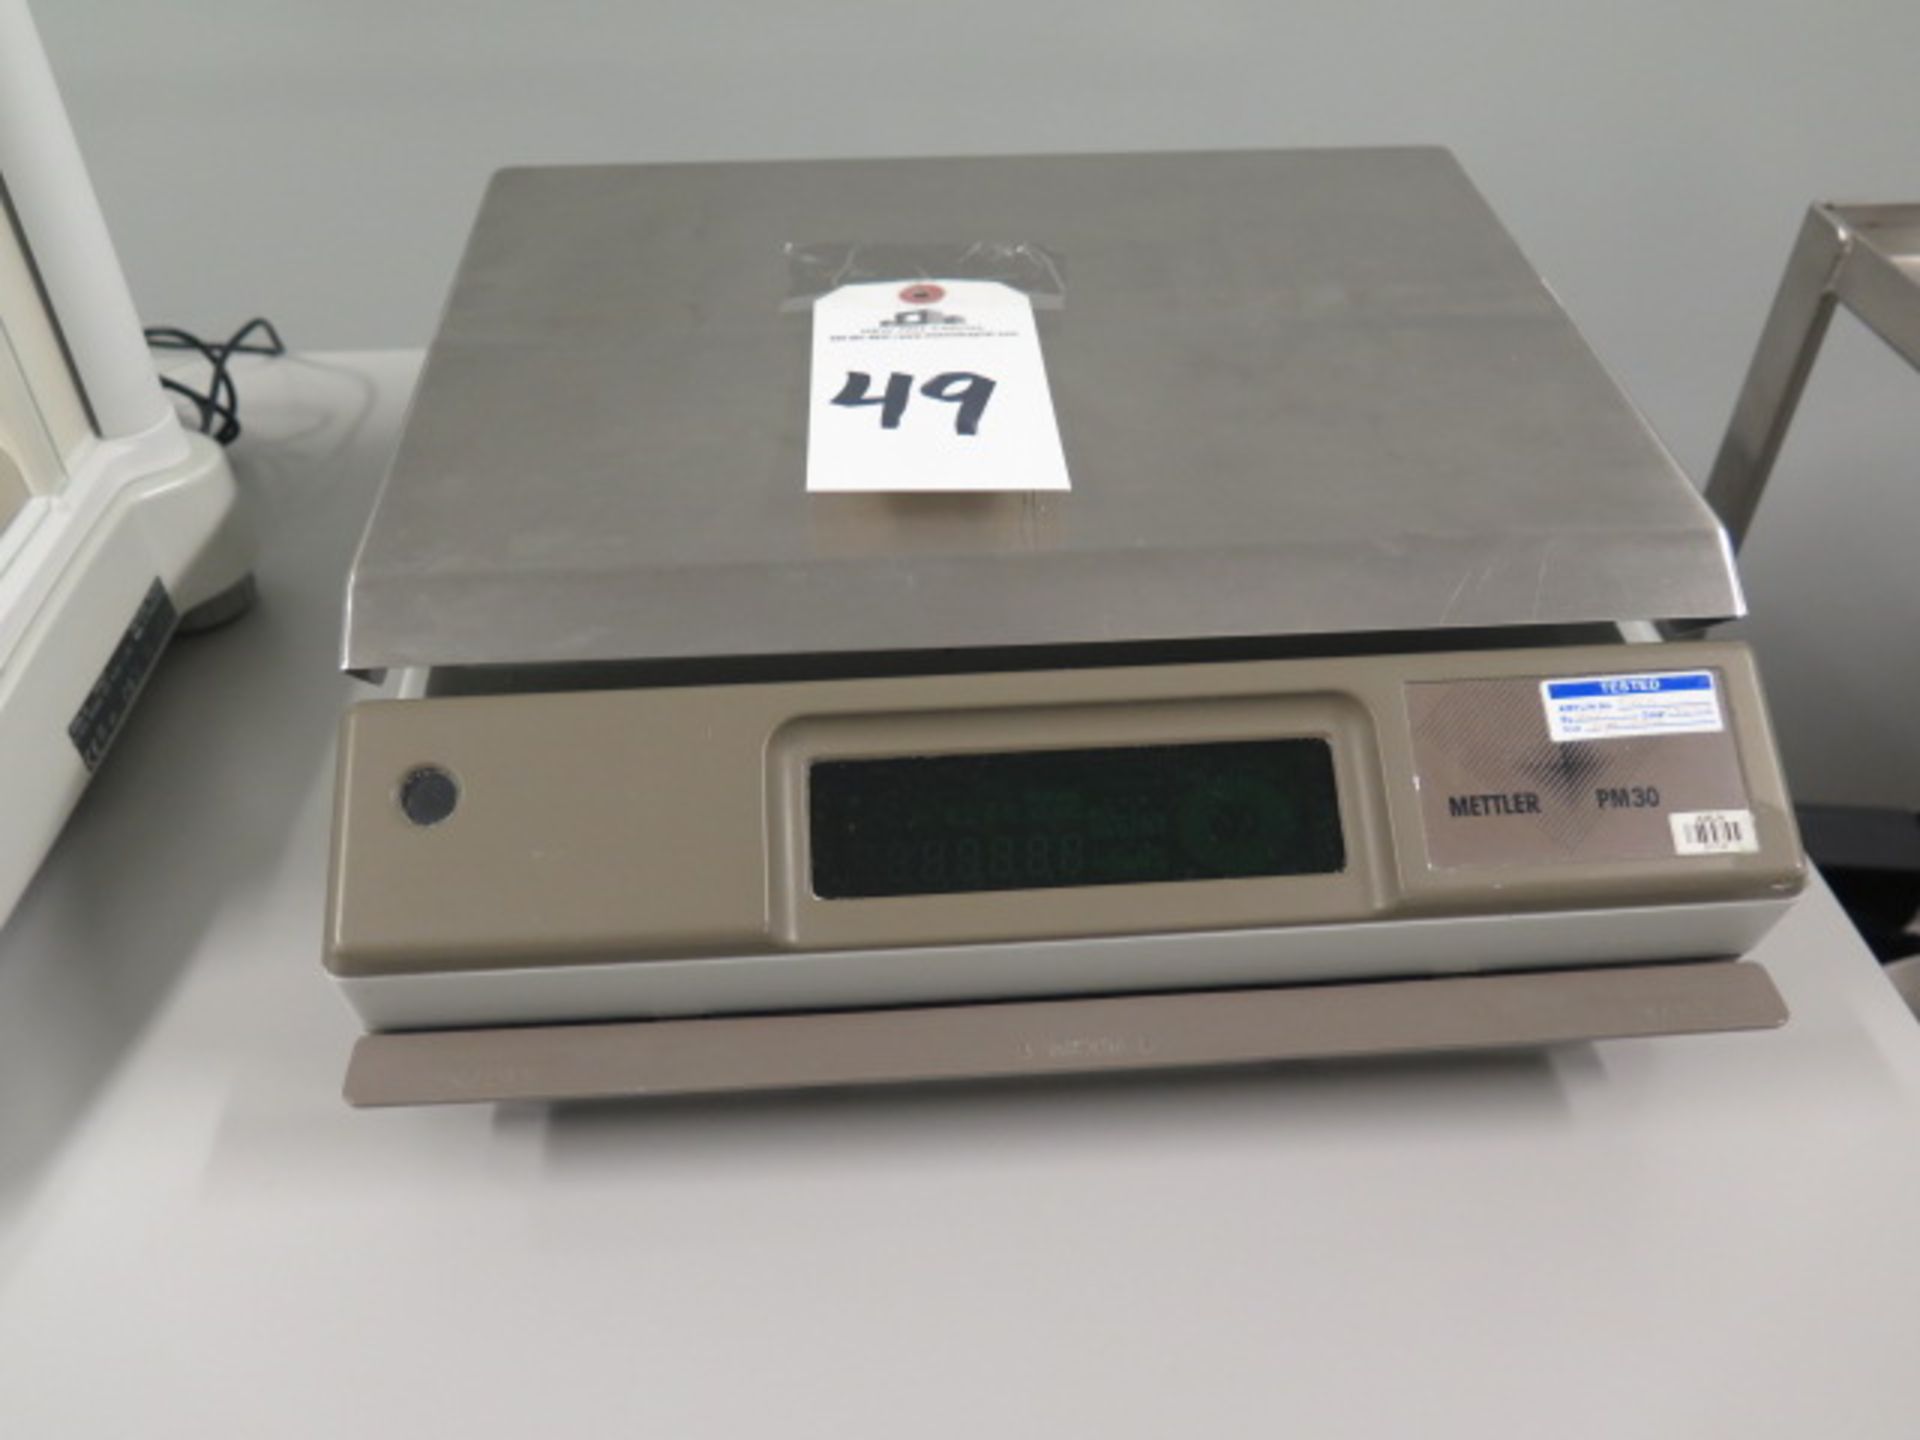 Mettler PM30 Digital Lab Scale | Loading Price: Hand Carry or Contact Rigger